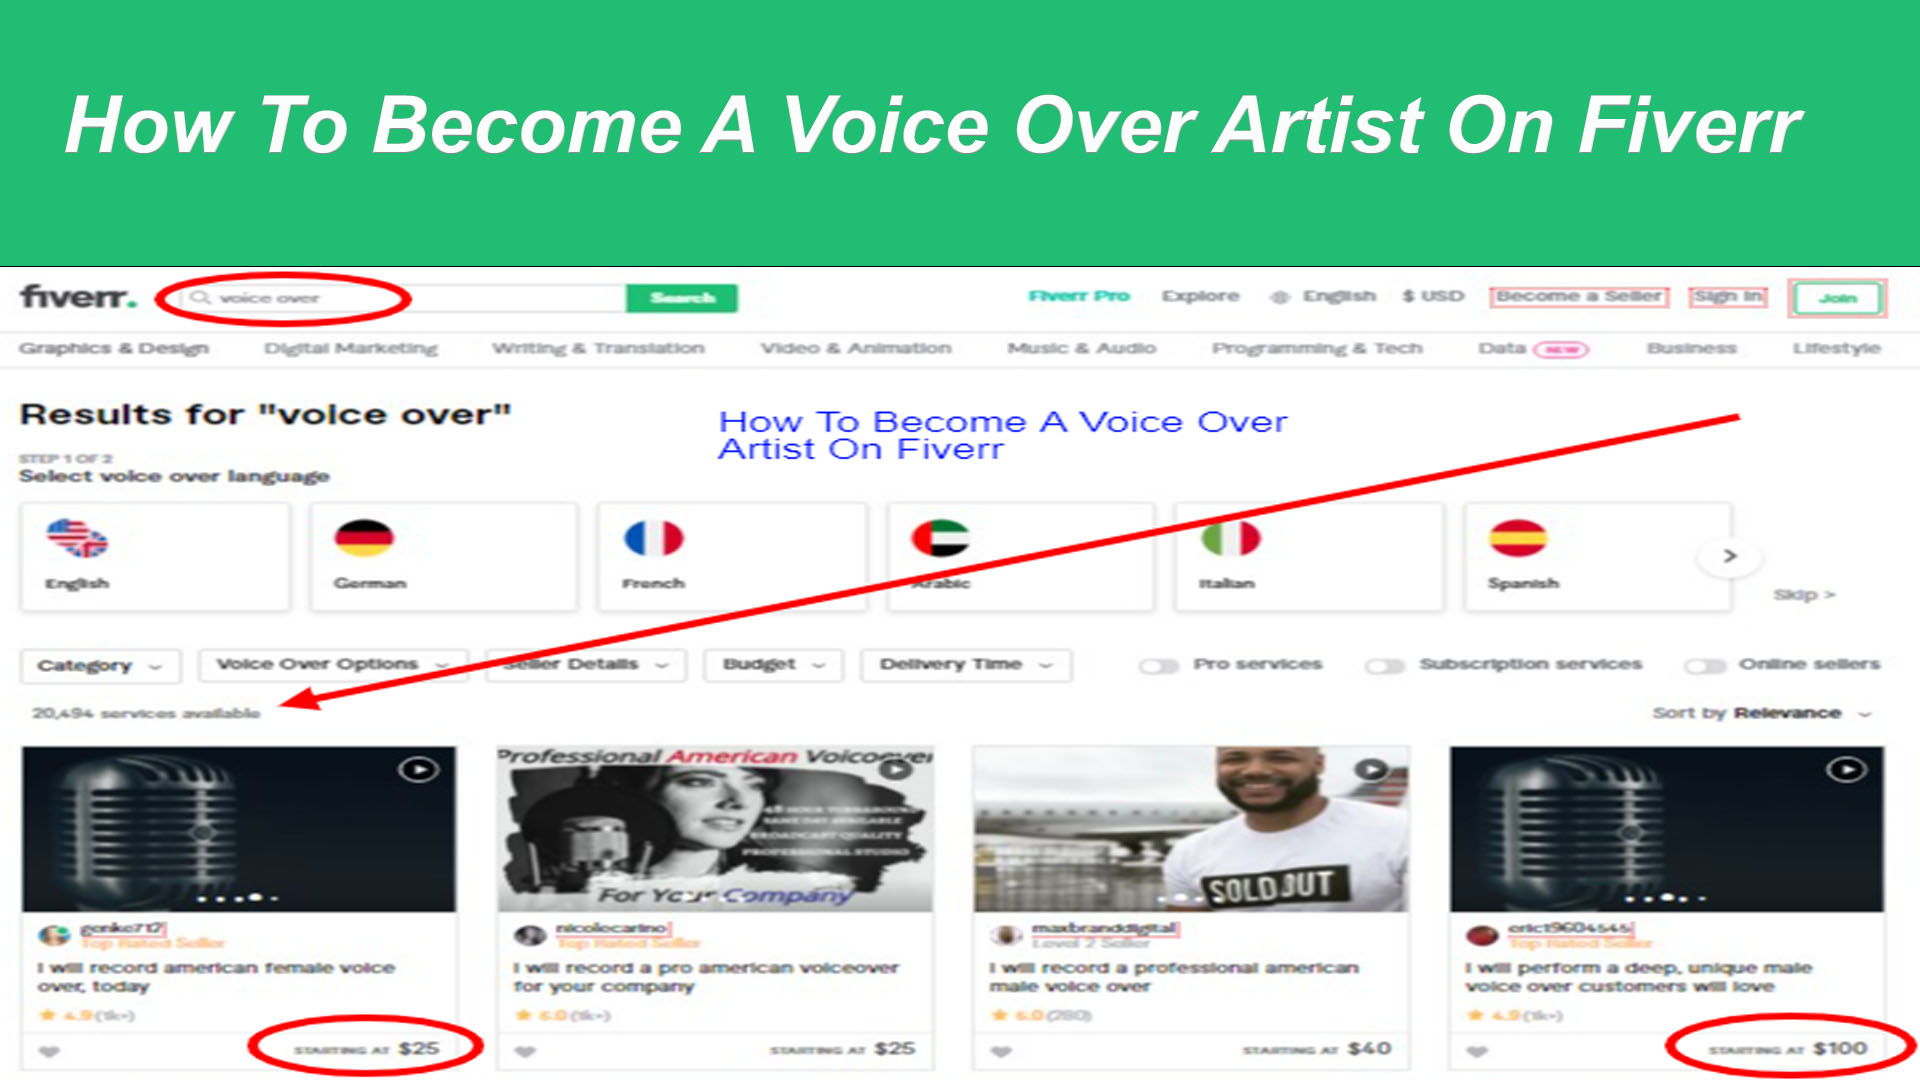 How To Become A Voice Over Artist On Fiverr